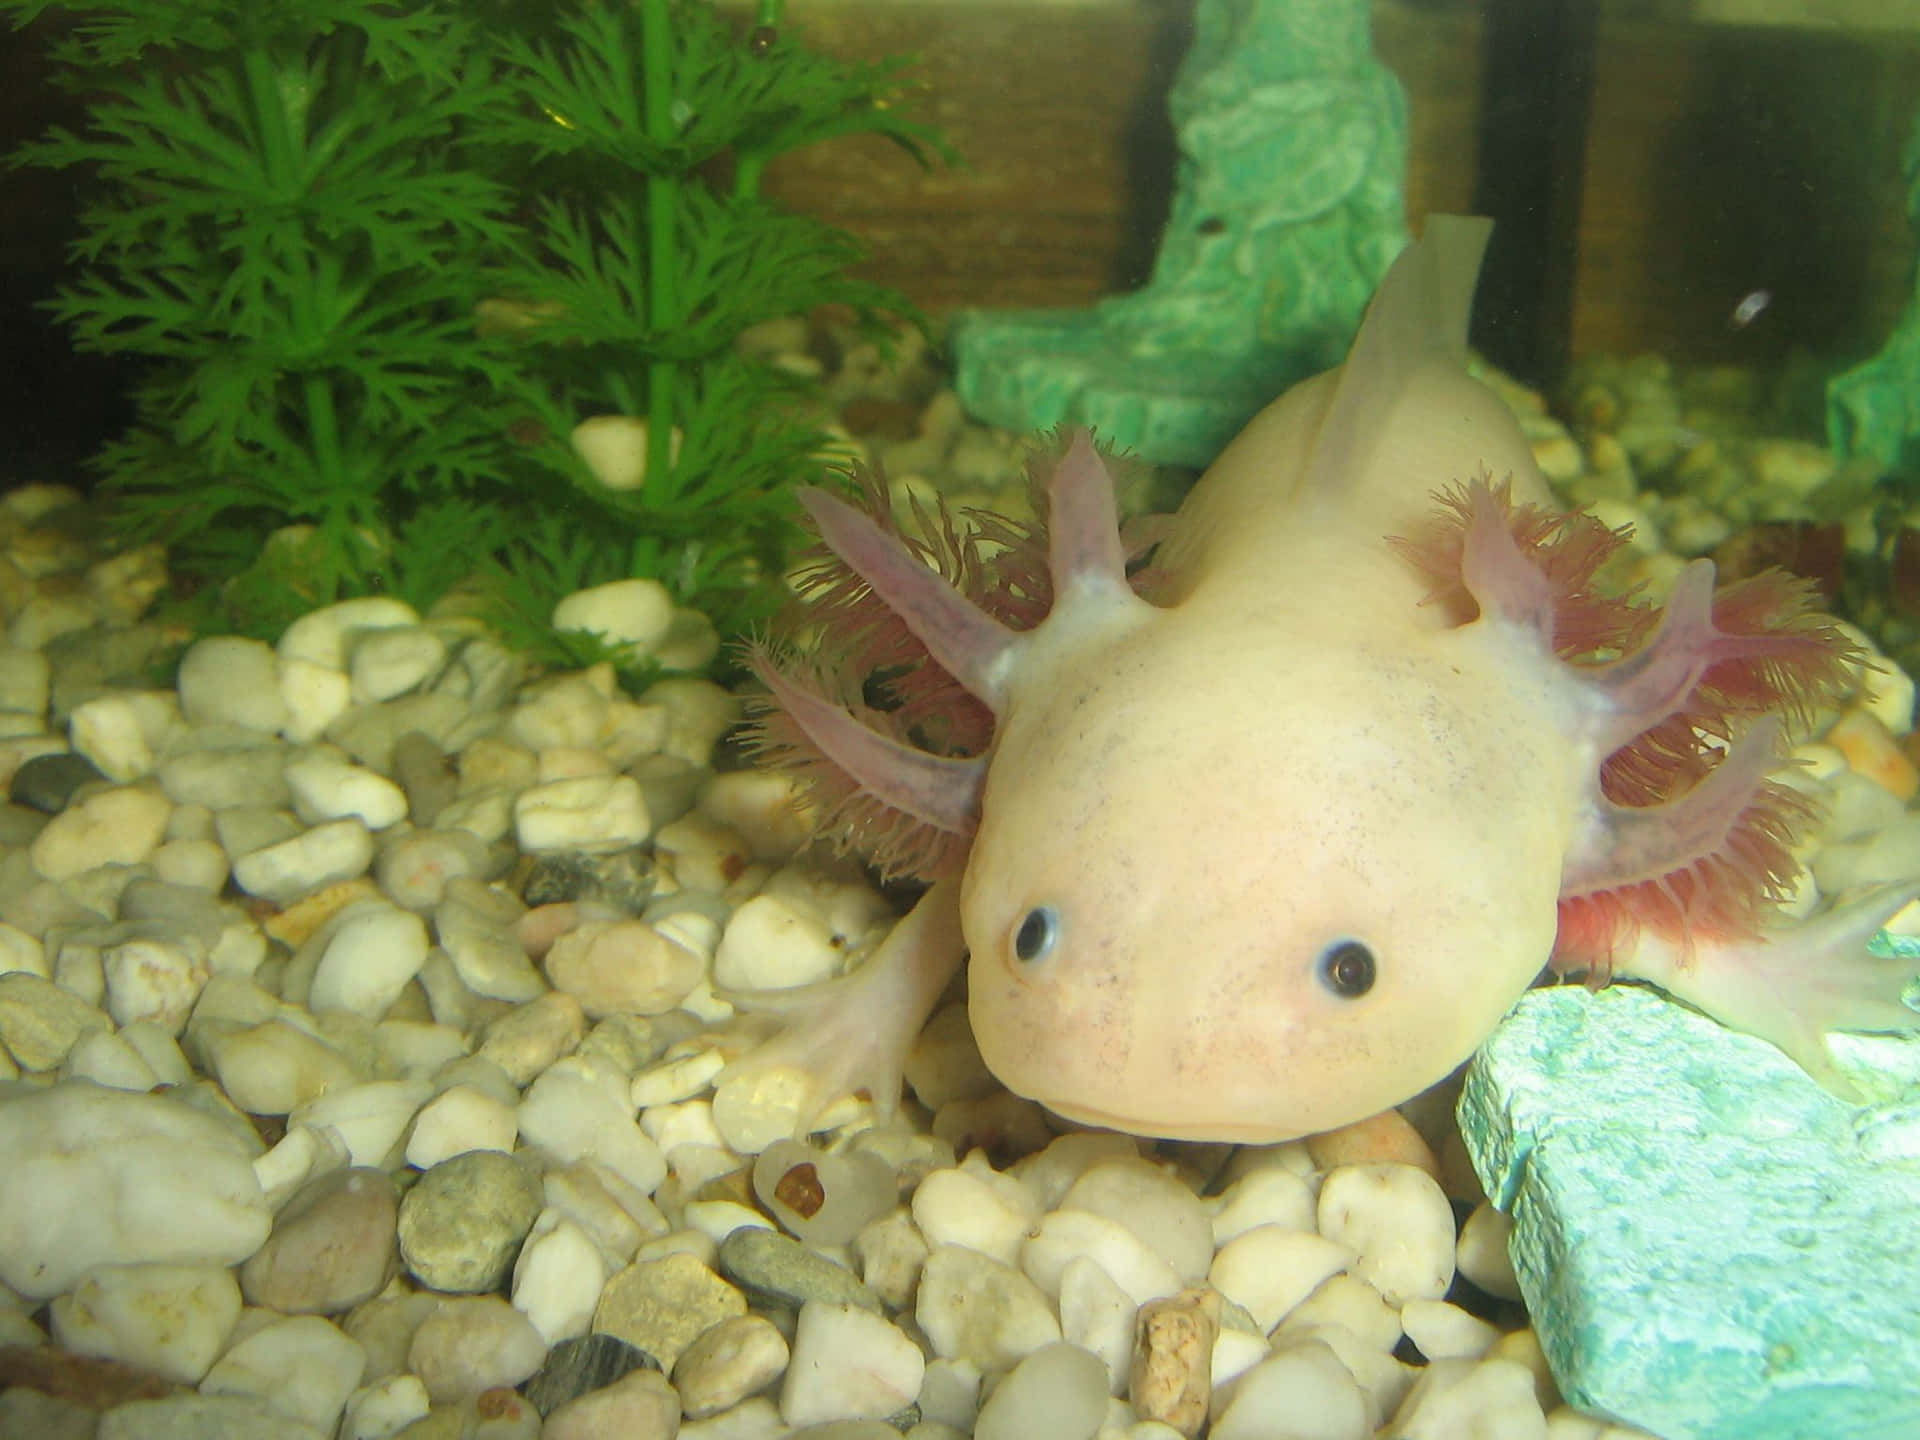 "A curious axolotl pauses in its tank."